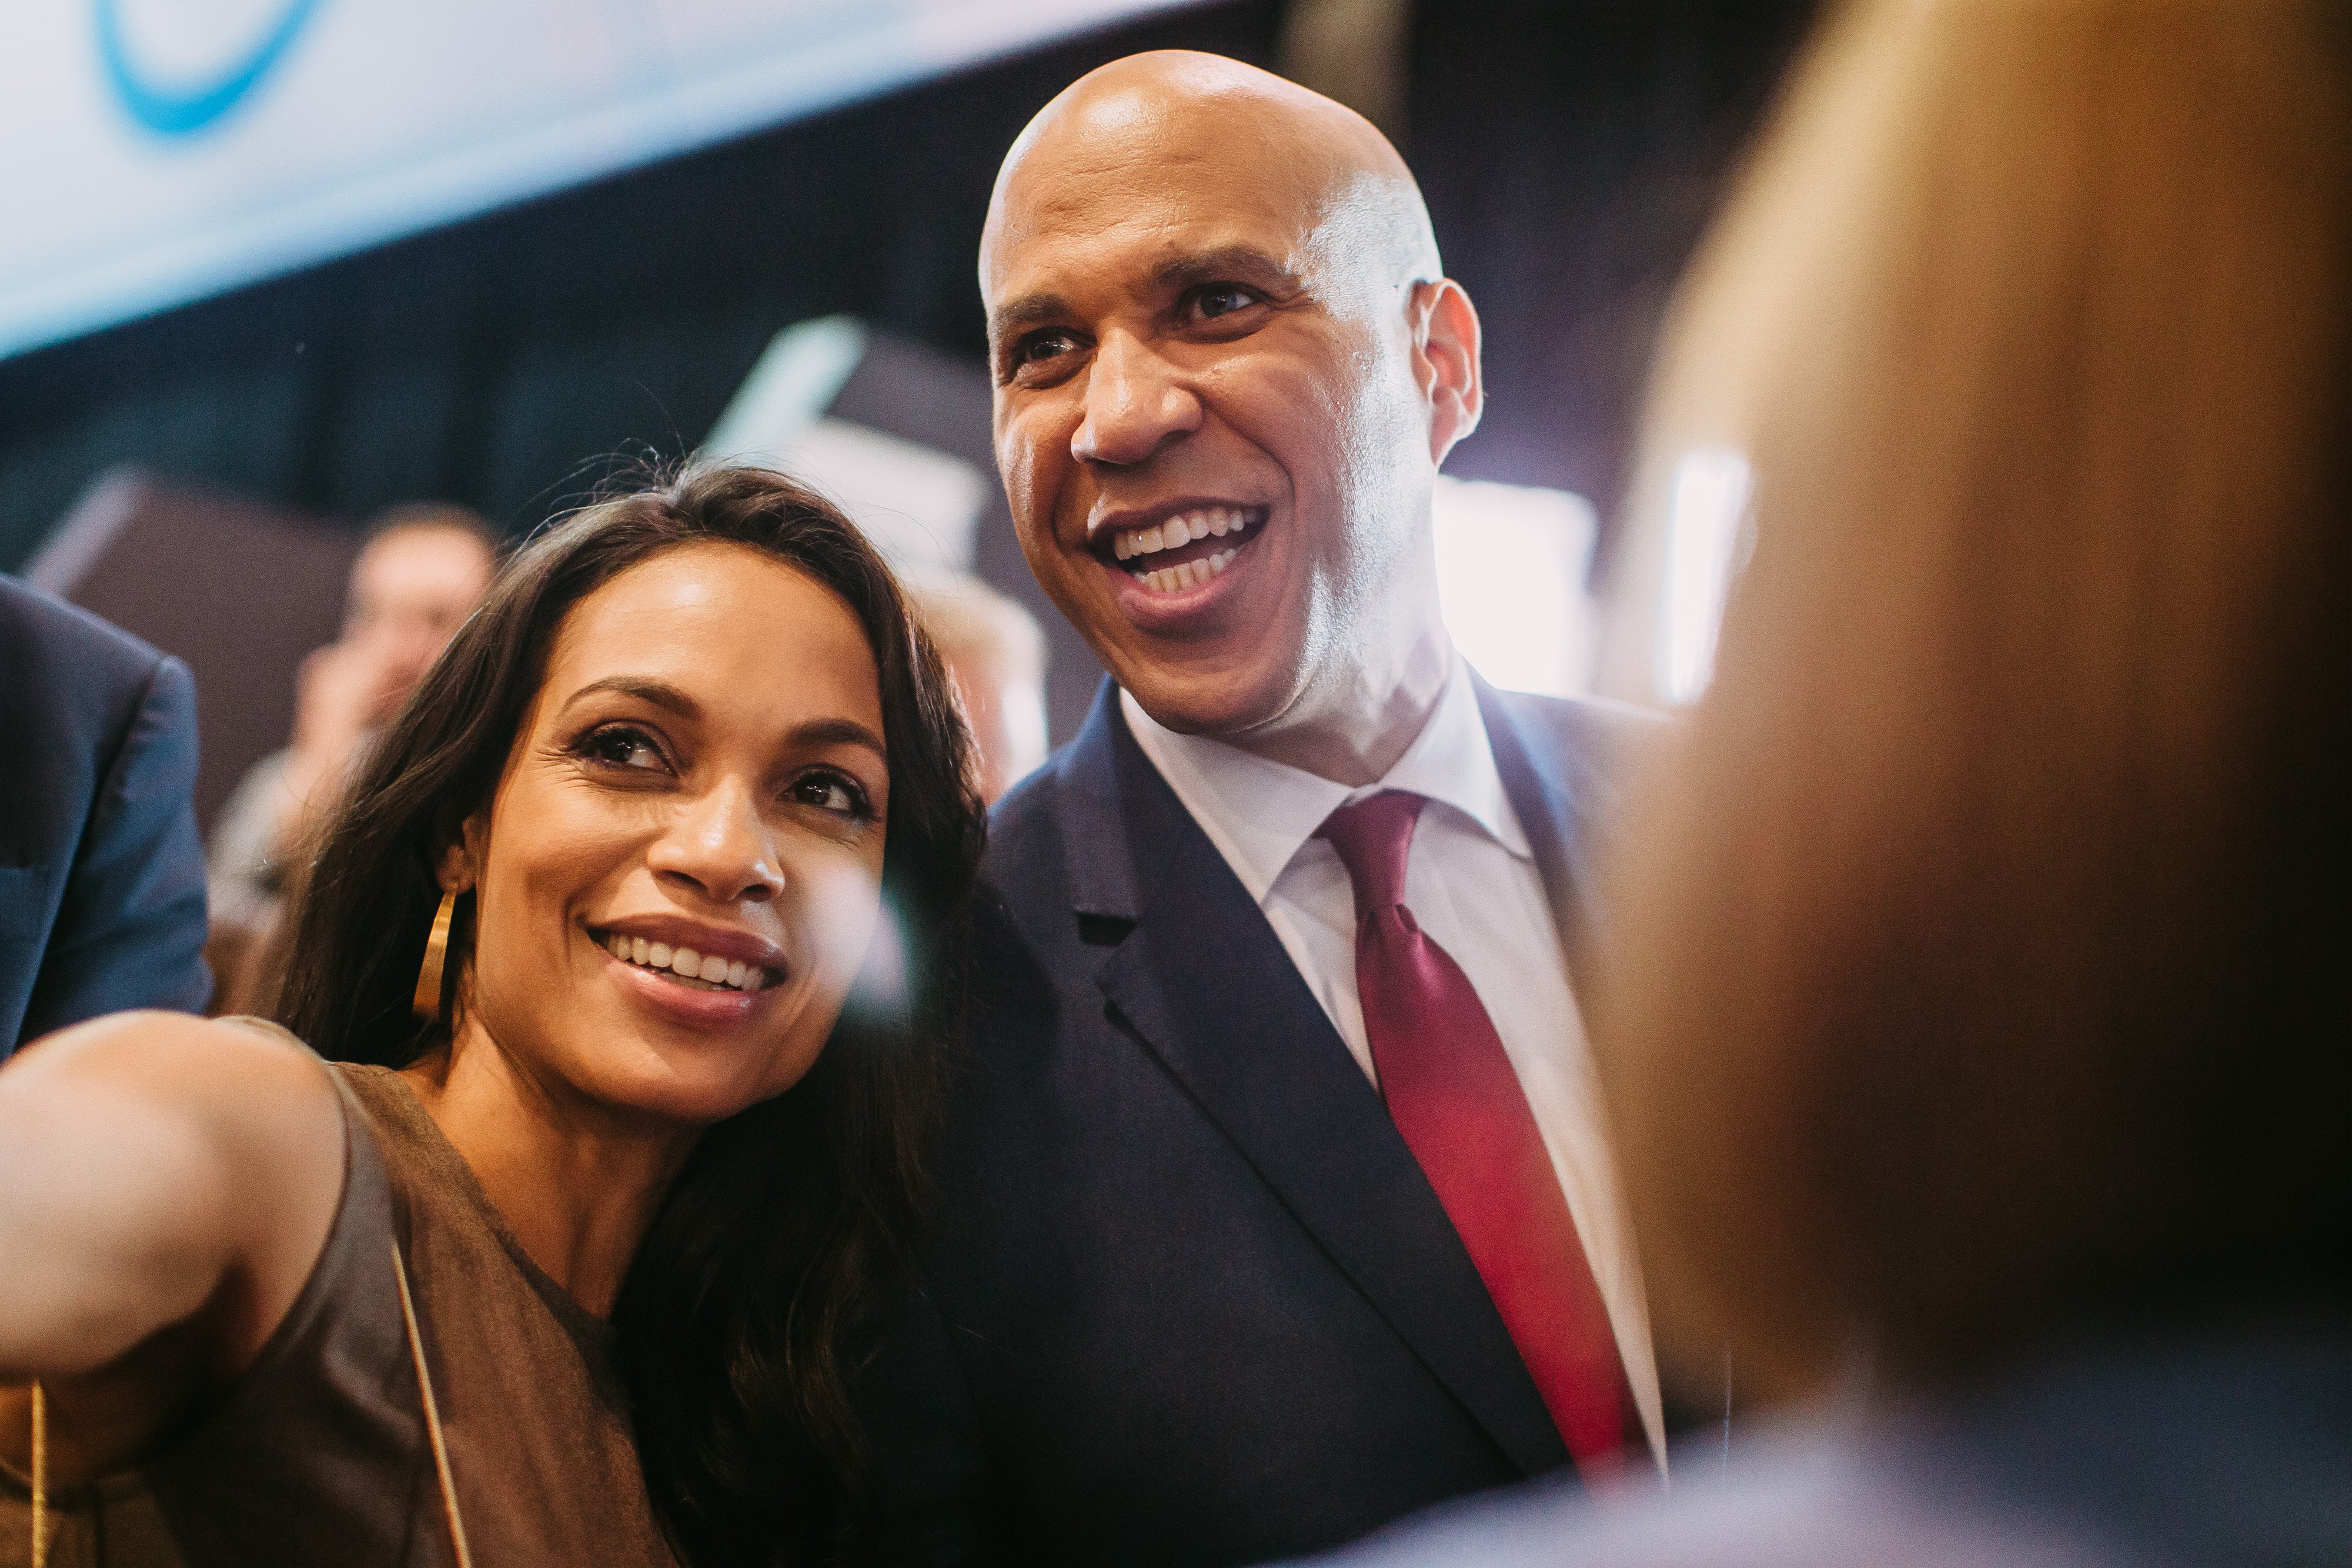 Senator Cory Booker and Rosario Dawson pose in the spin room after the Democratic presidential candidate debate on October 15, 2019 in Westerville, Ohio ┃Source: Getty Images